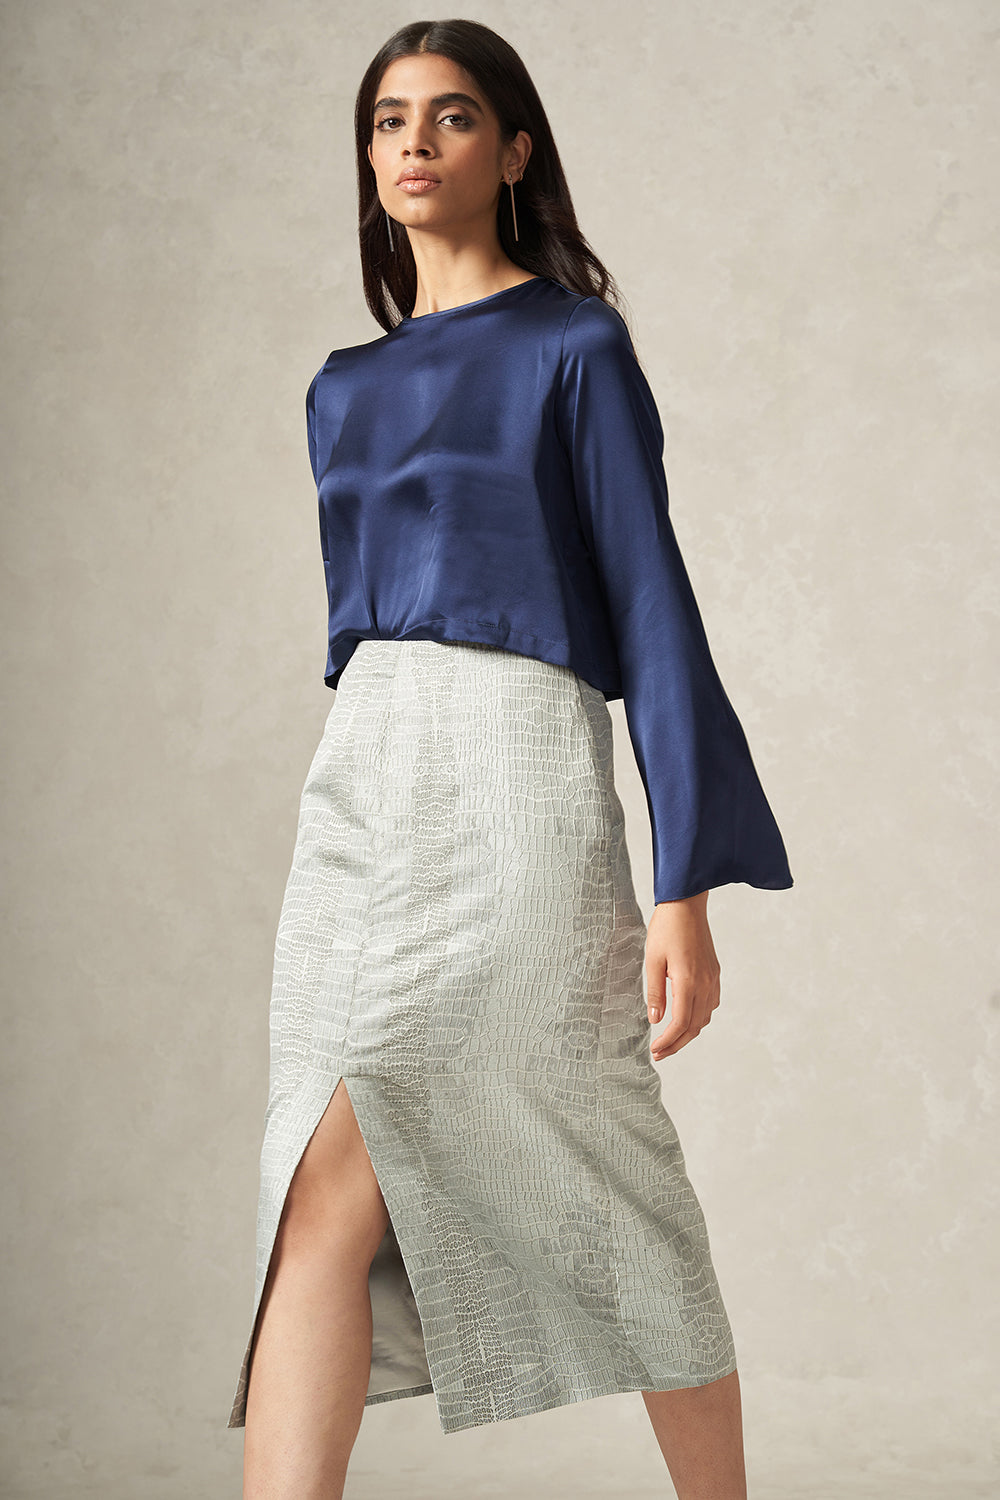 Grey Handwoven Pure Satin Silk Pencil Skirt with Crocodile Pattern and Front Slit